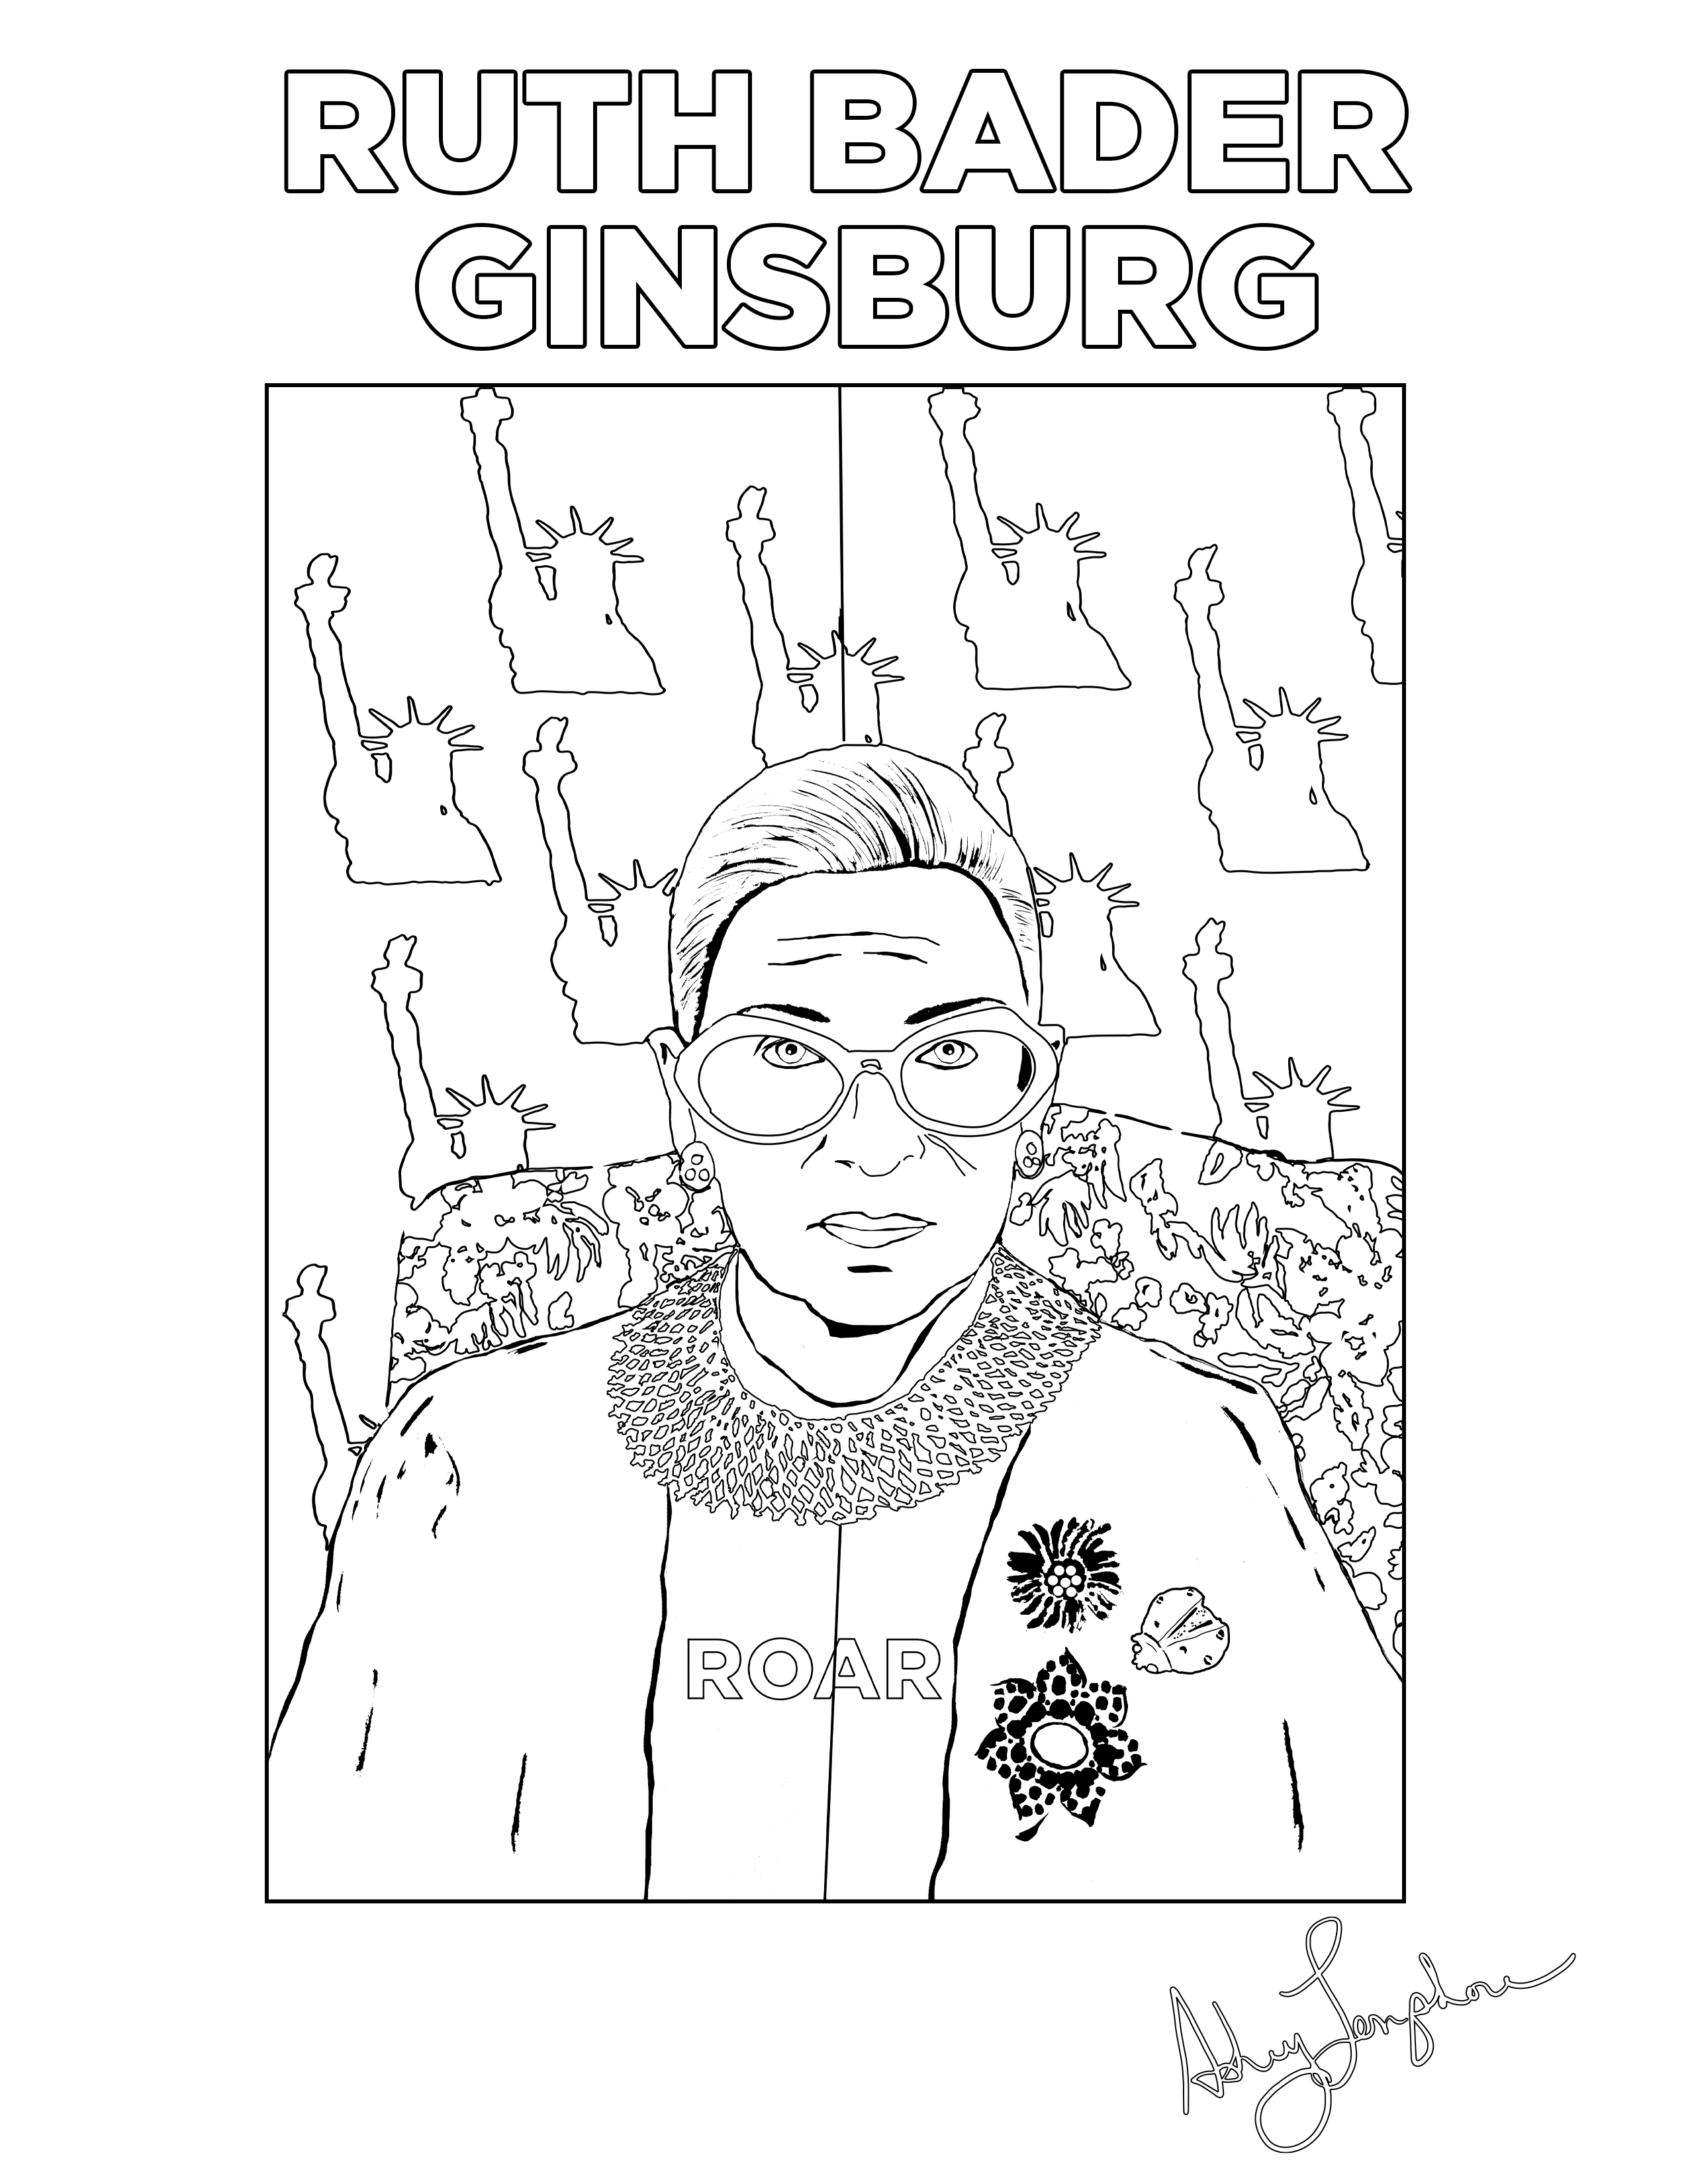 Ashley Longshore coloring pages featuring Ruth Bader Ginsburg.